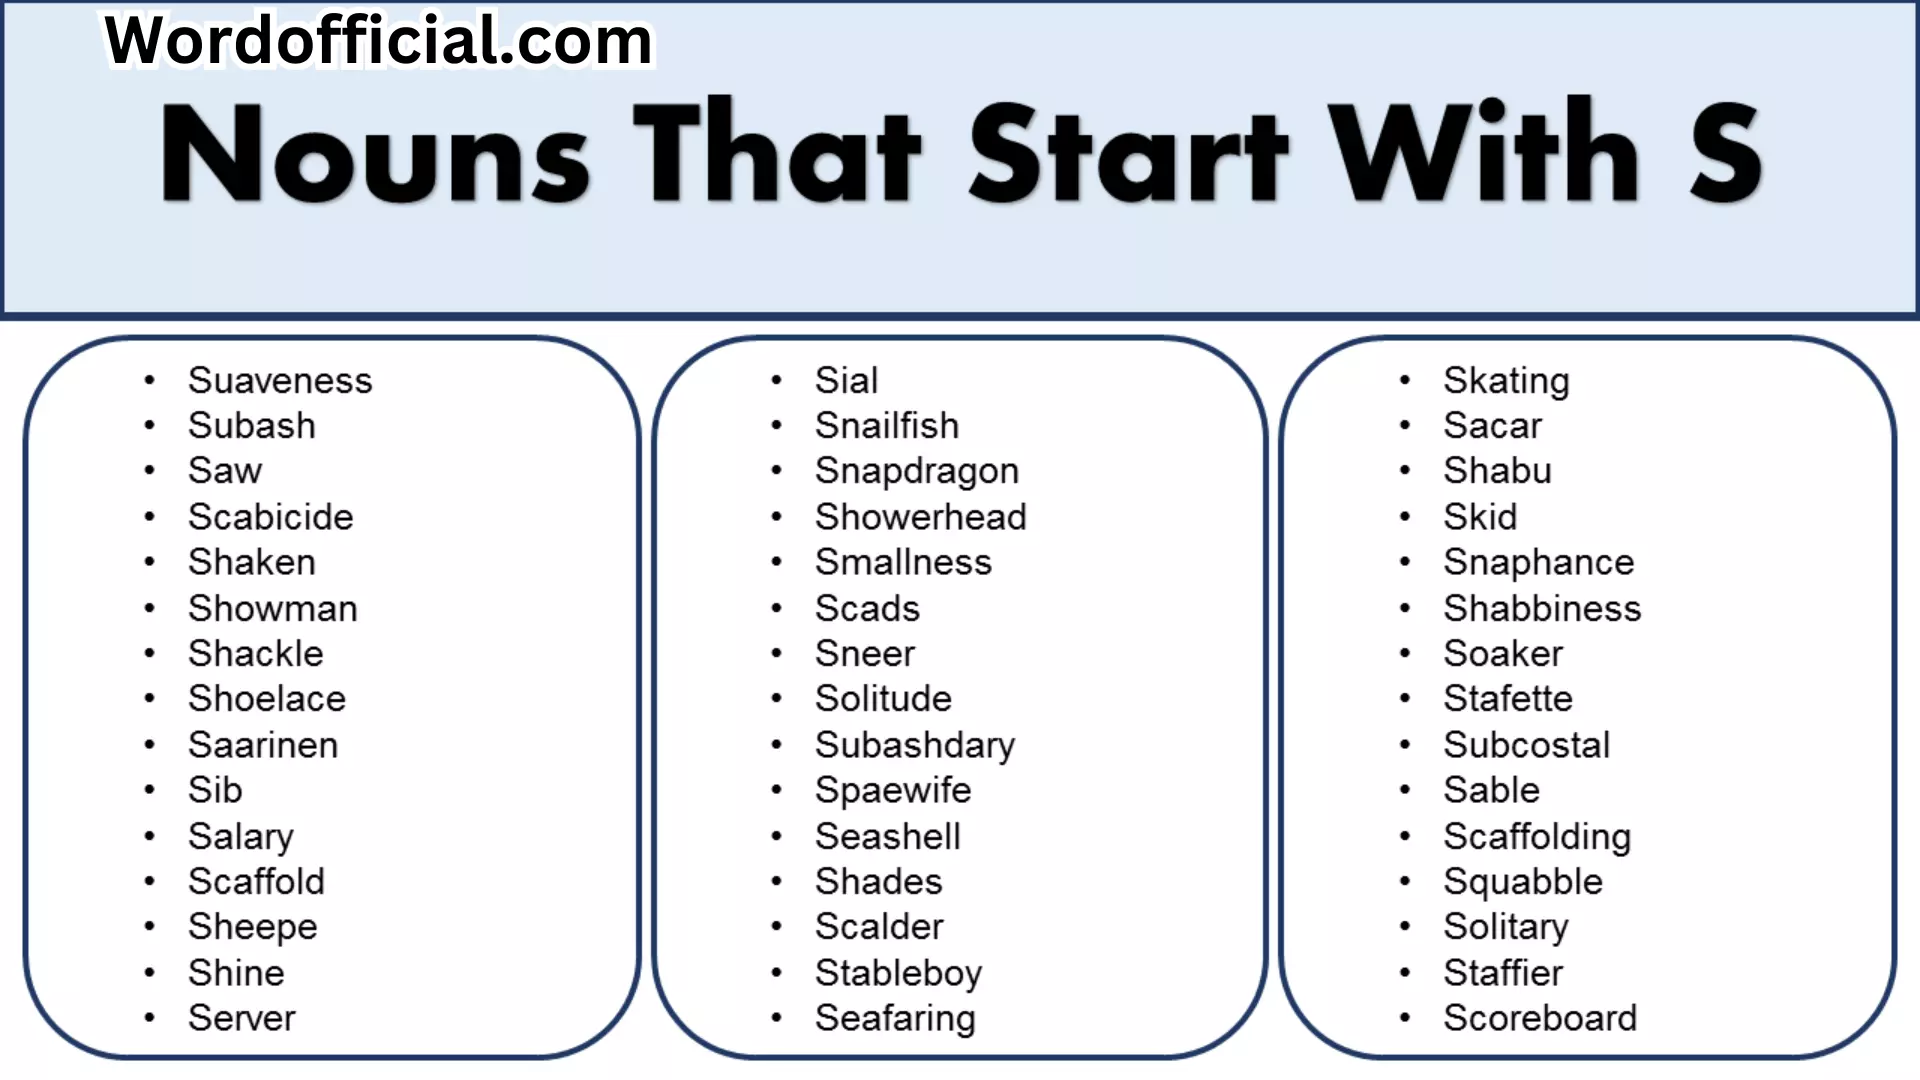 469+List Of Nouns That Start With S